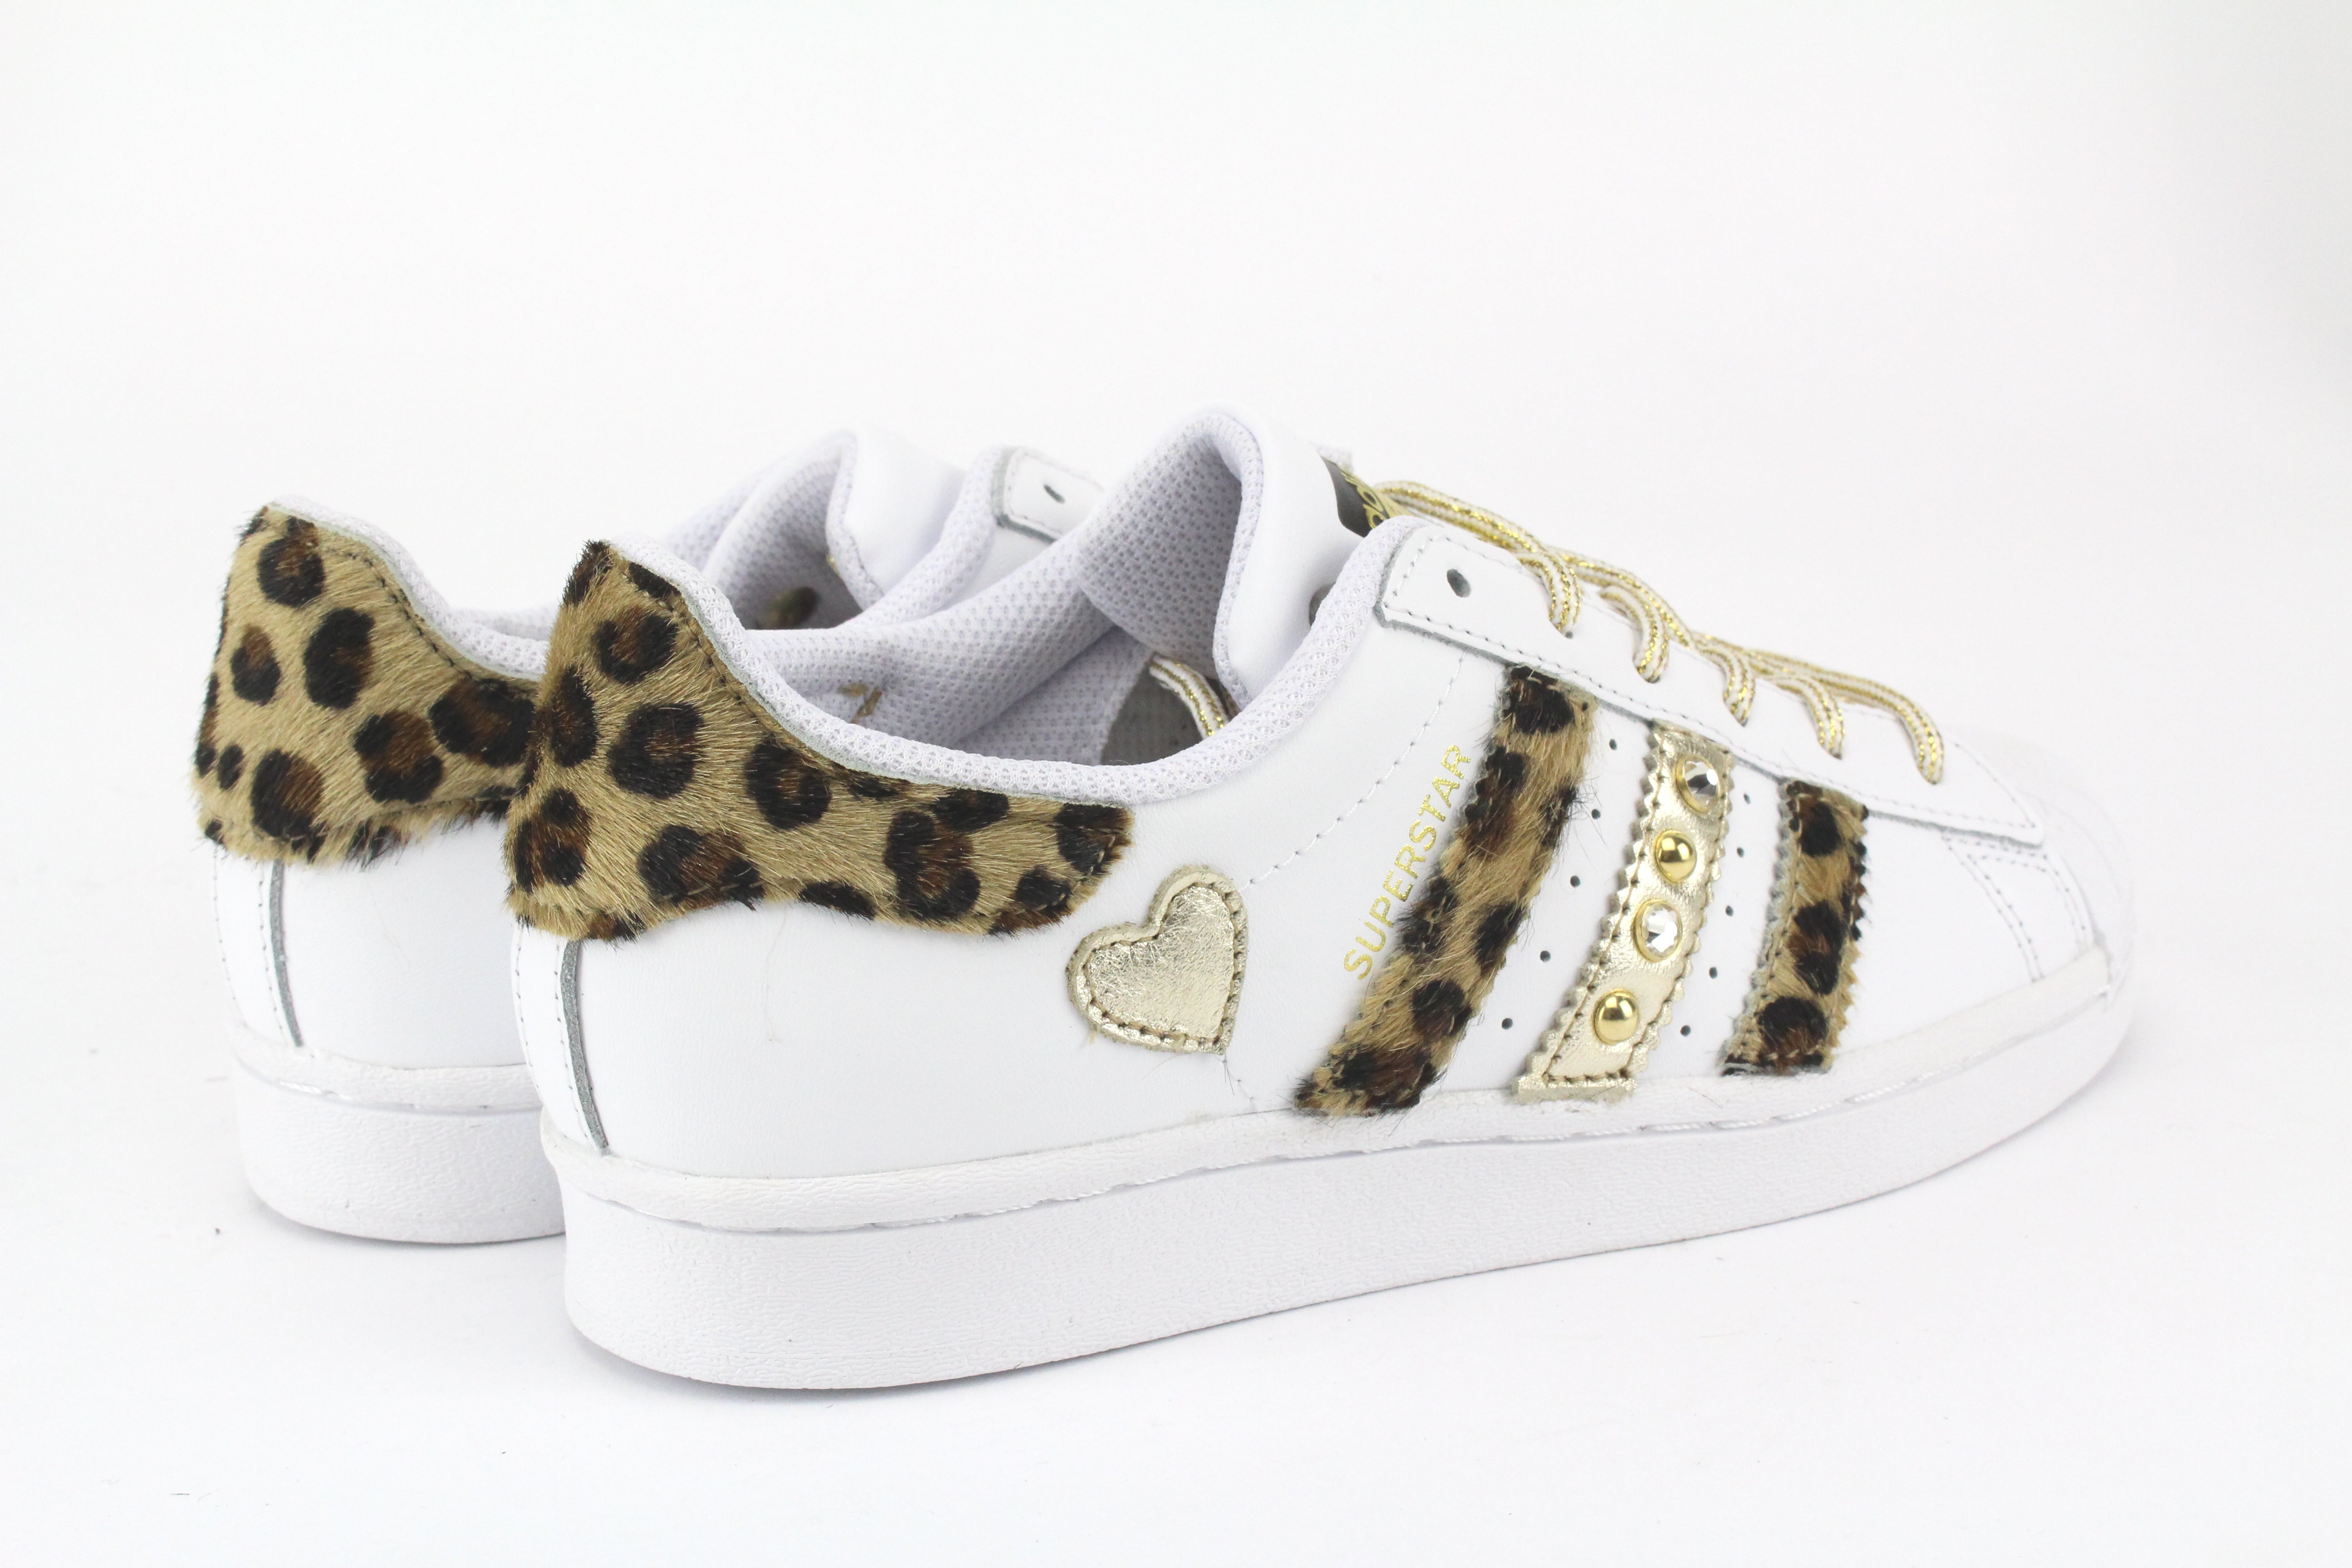 Adidas Superstar Maculate Pelle Borchie & Cuore